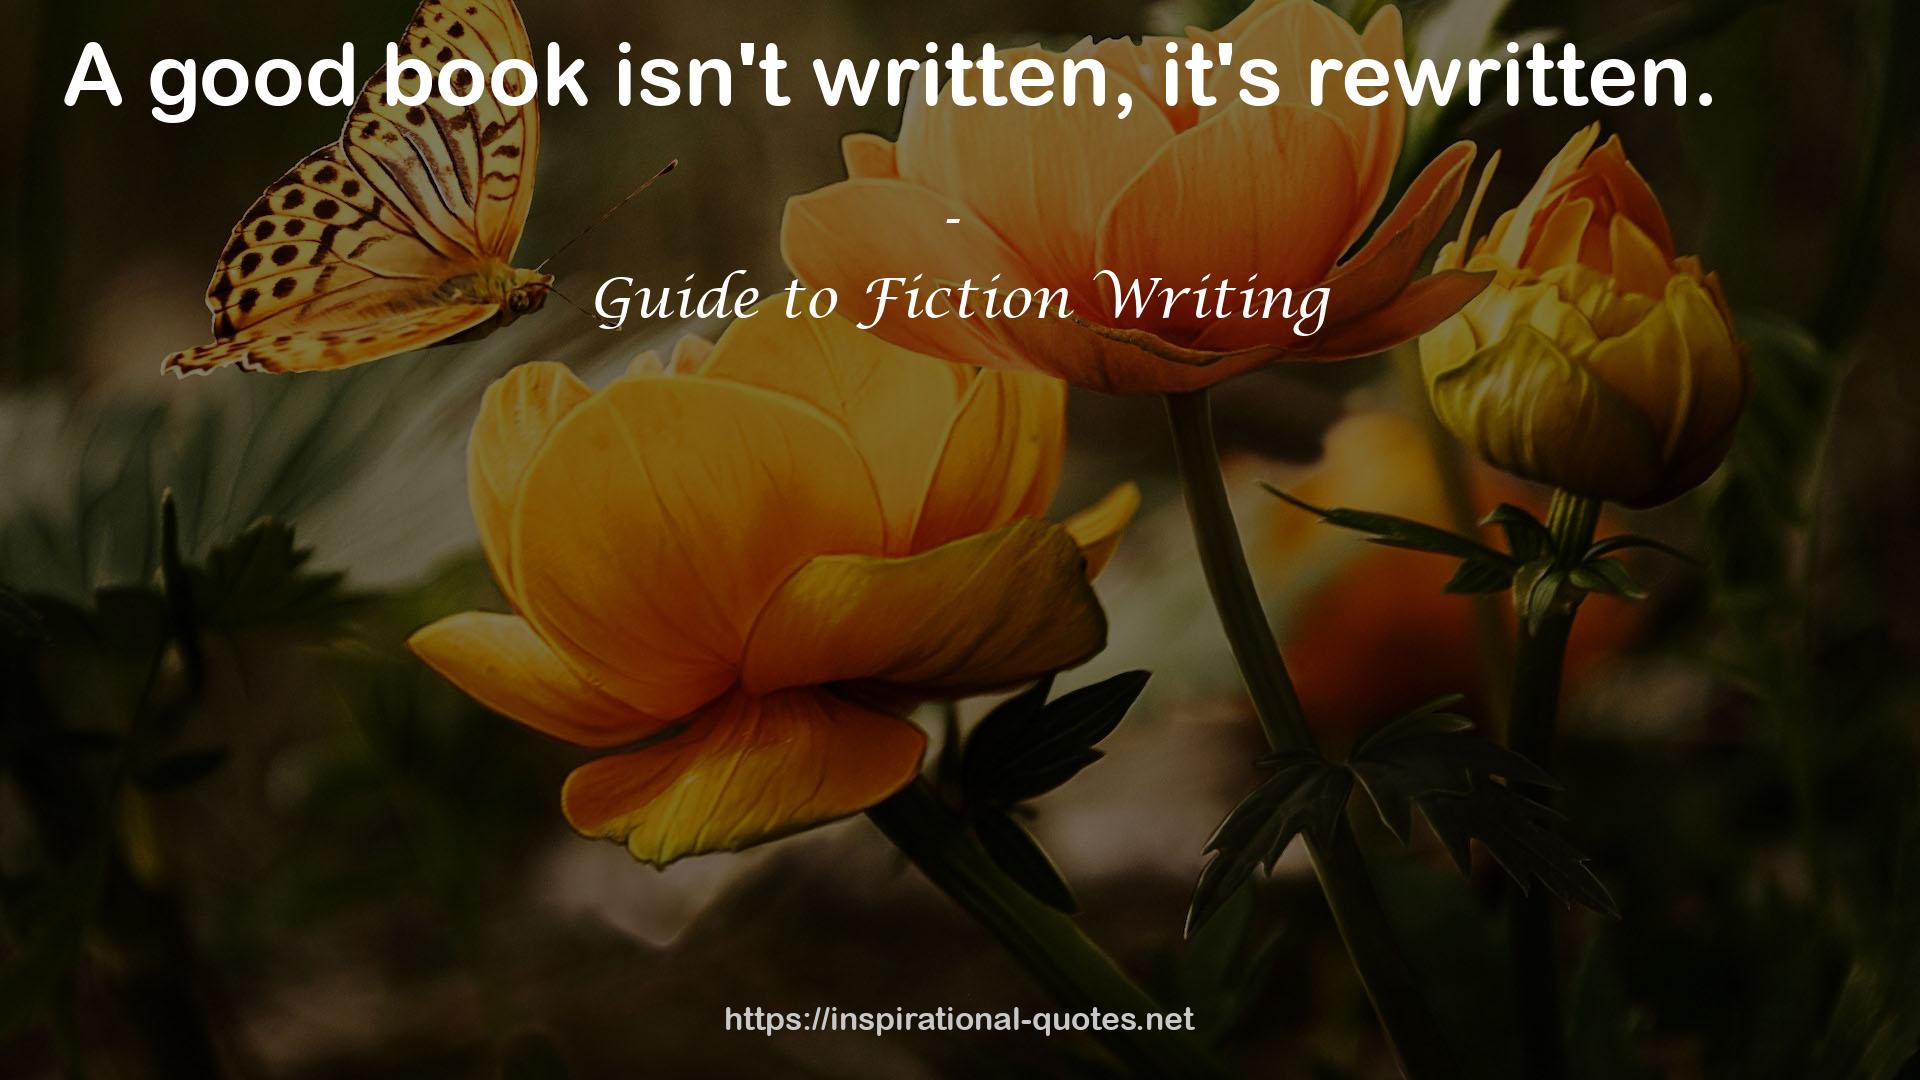 Guide to Fiction Writing QUOTES